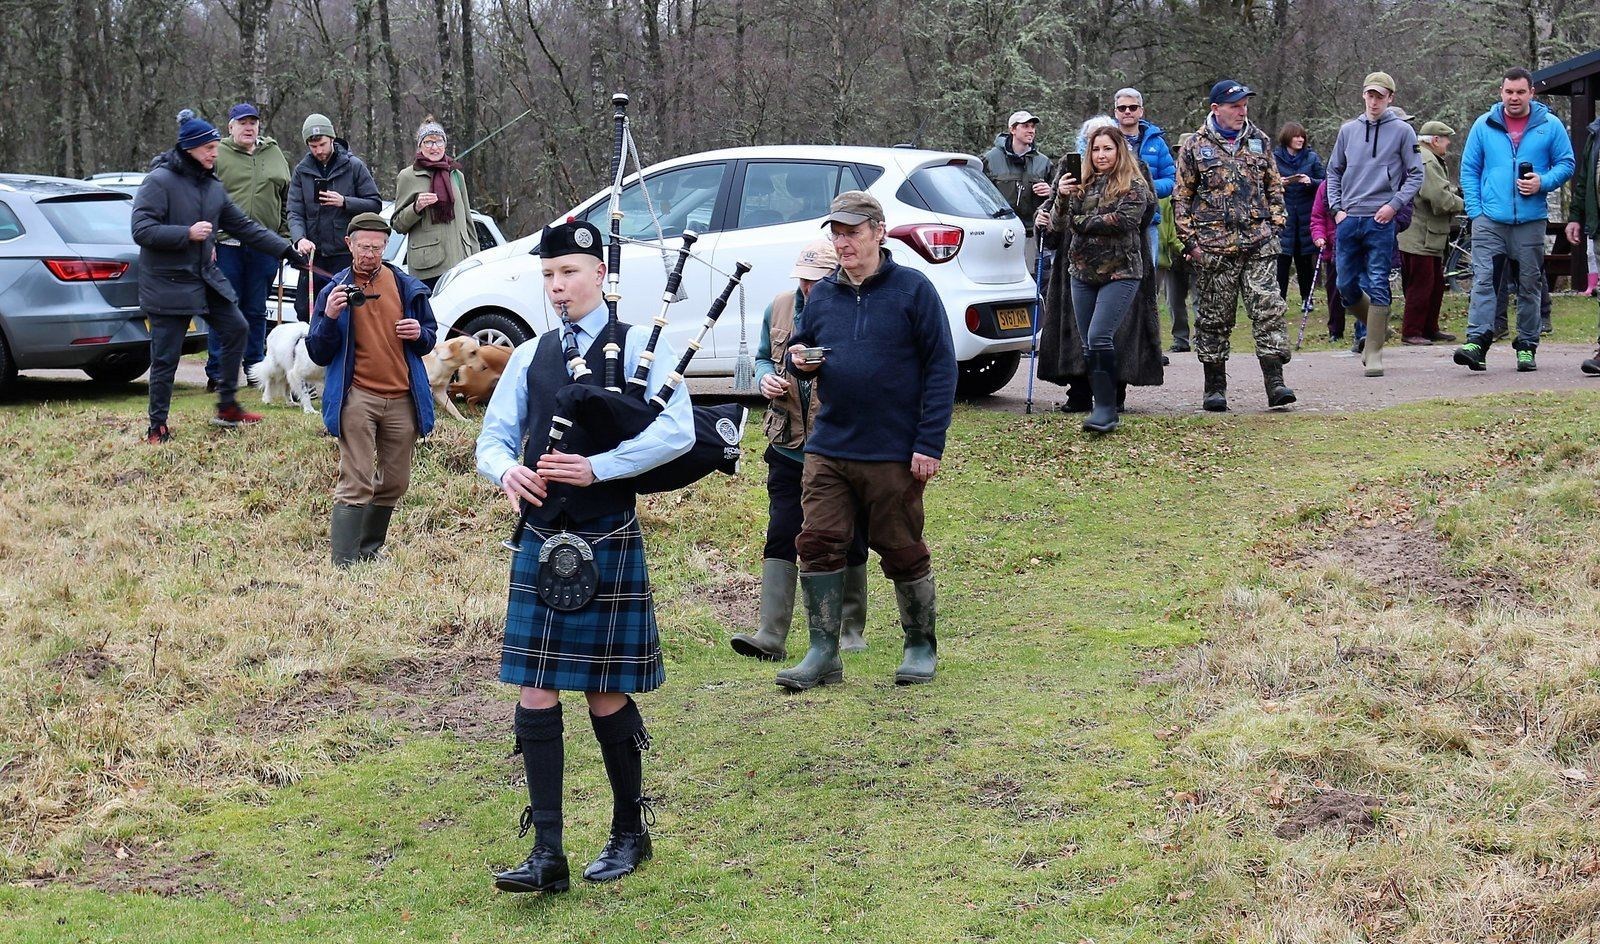 Piper Liam Bolger leads the gathering to the river.